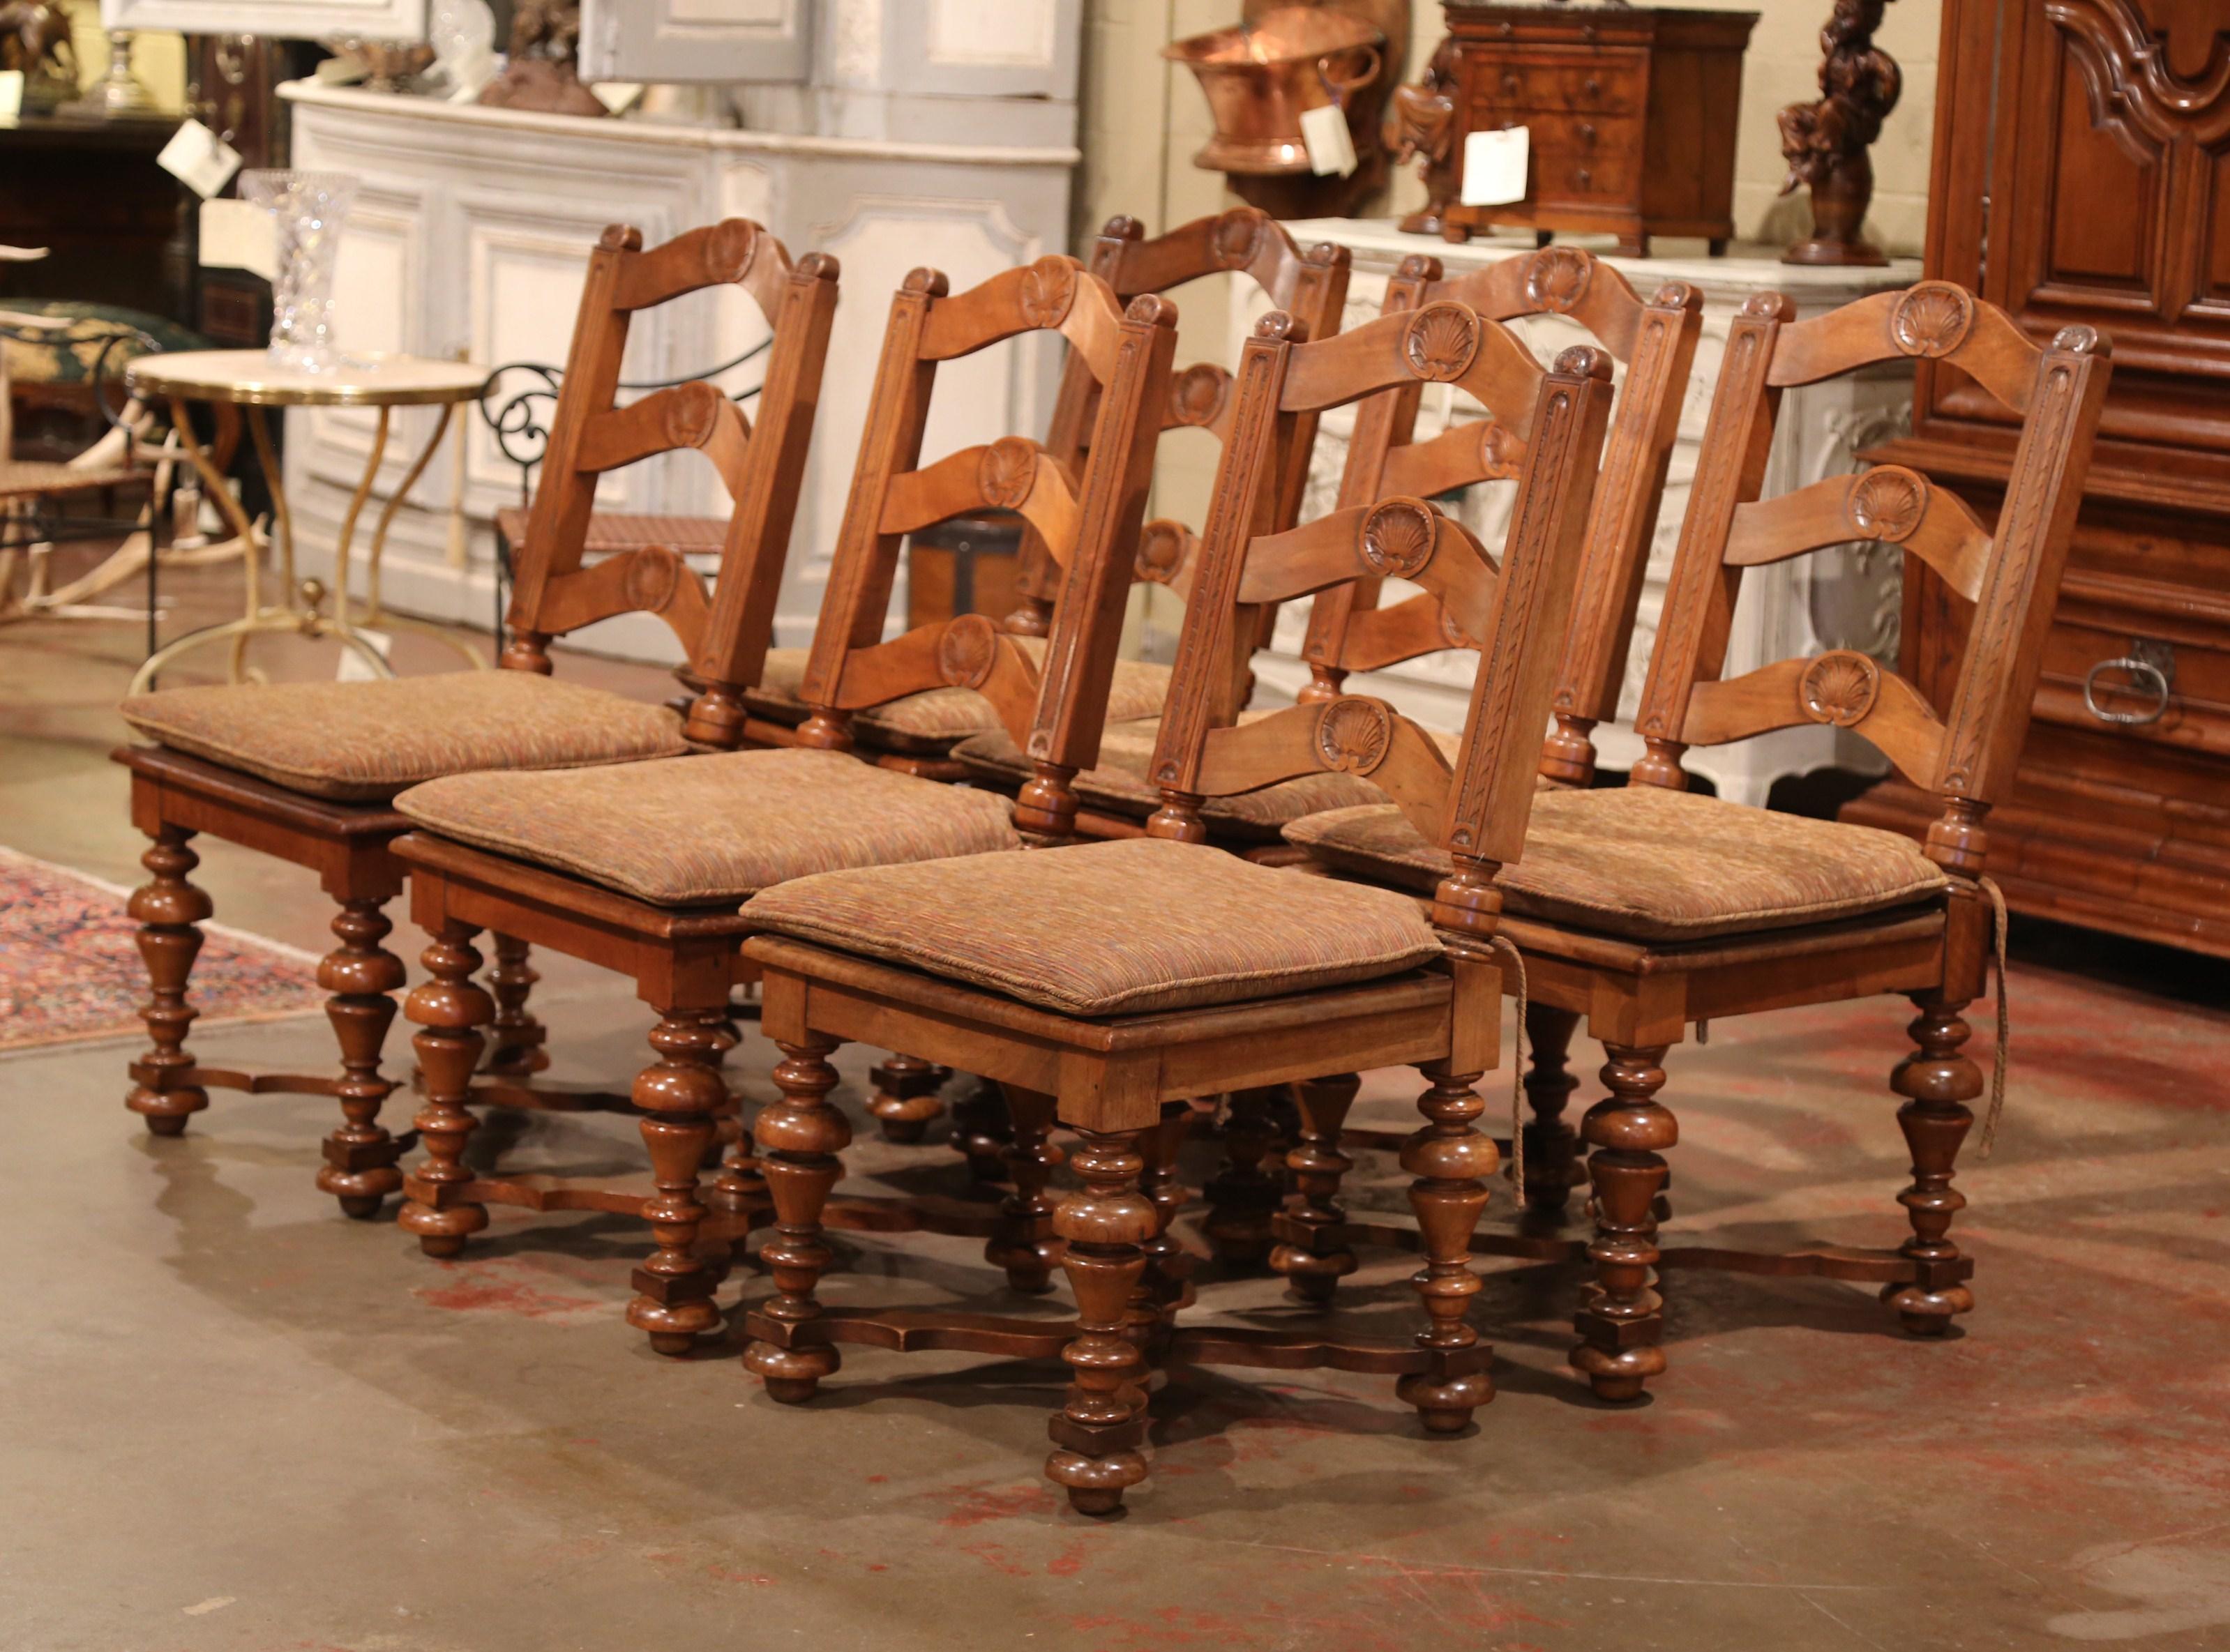 This elegant set of country chairs was crafted in France, circa 1880. Carved from solid walnut, each large chair has a tall pitched back with three ladders embellished by a carved shell motif. The chairs have wide and deep seat over four carved